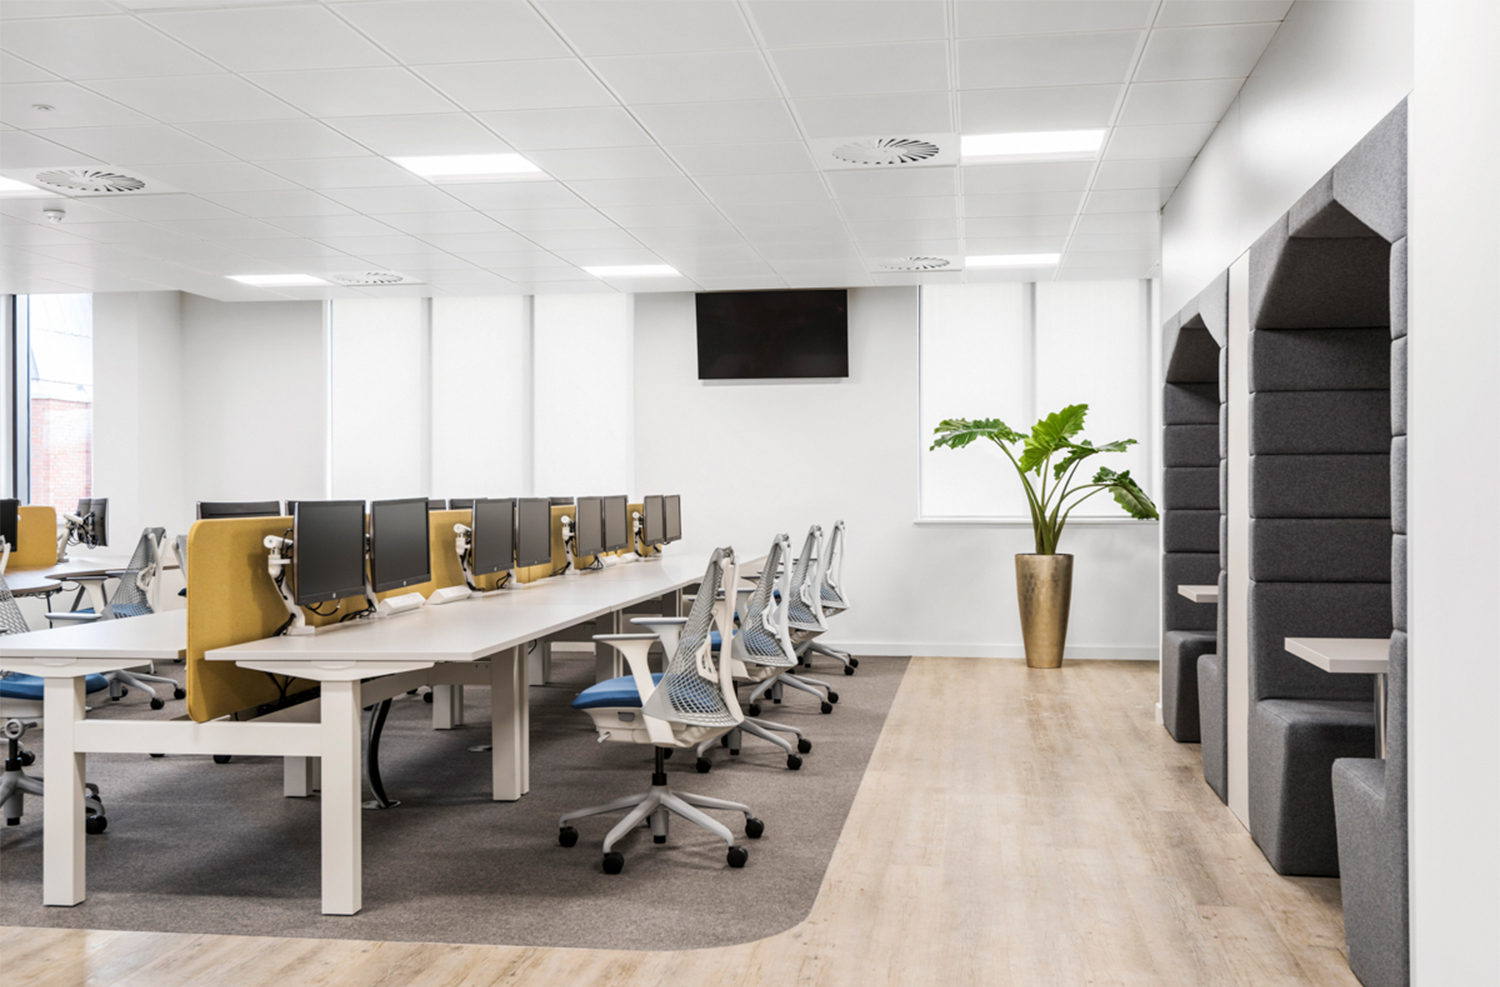 good office design with legal and environmental considerations